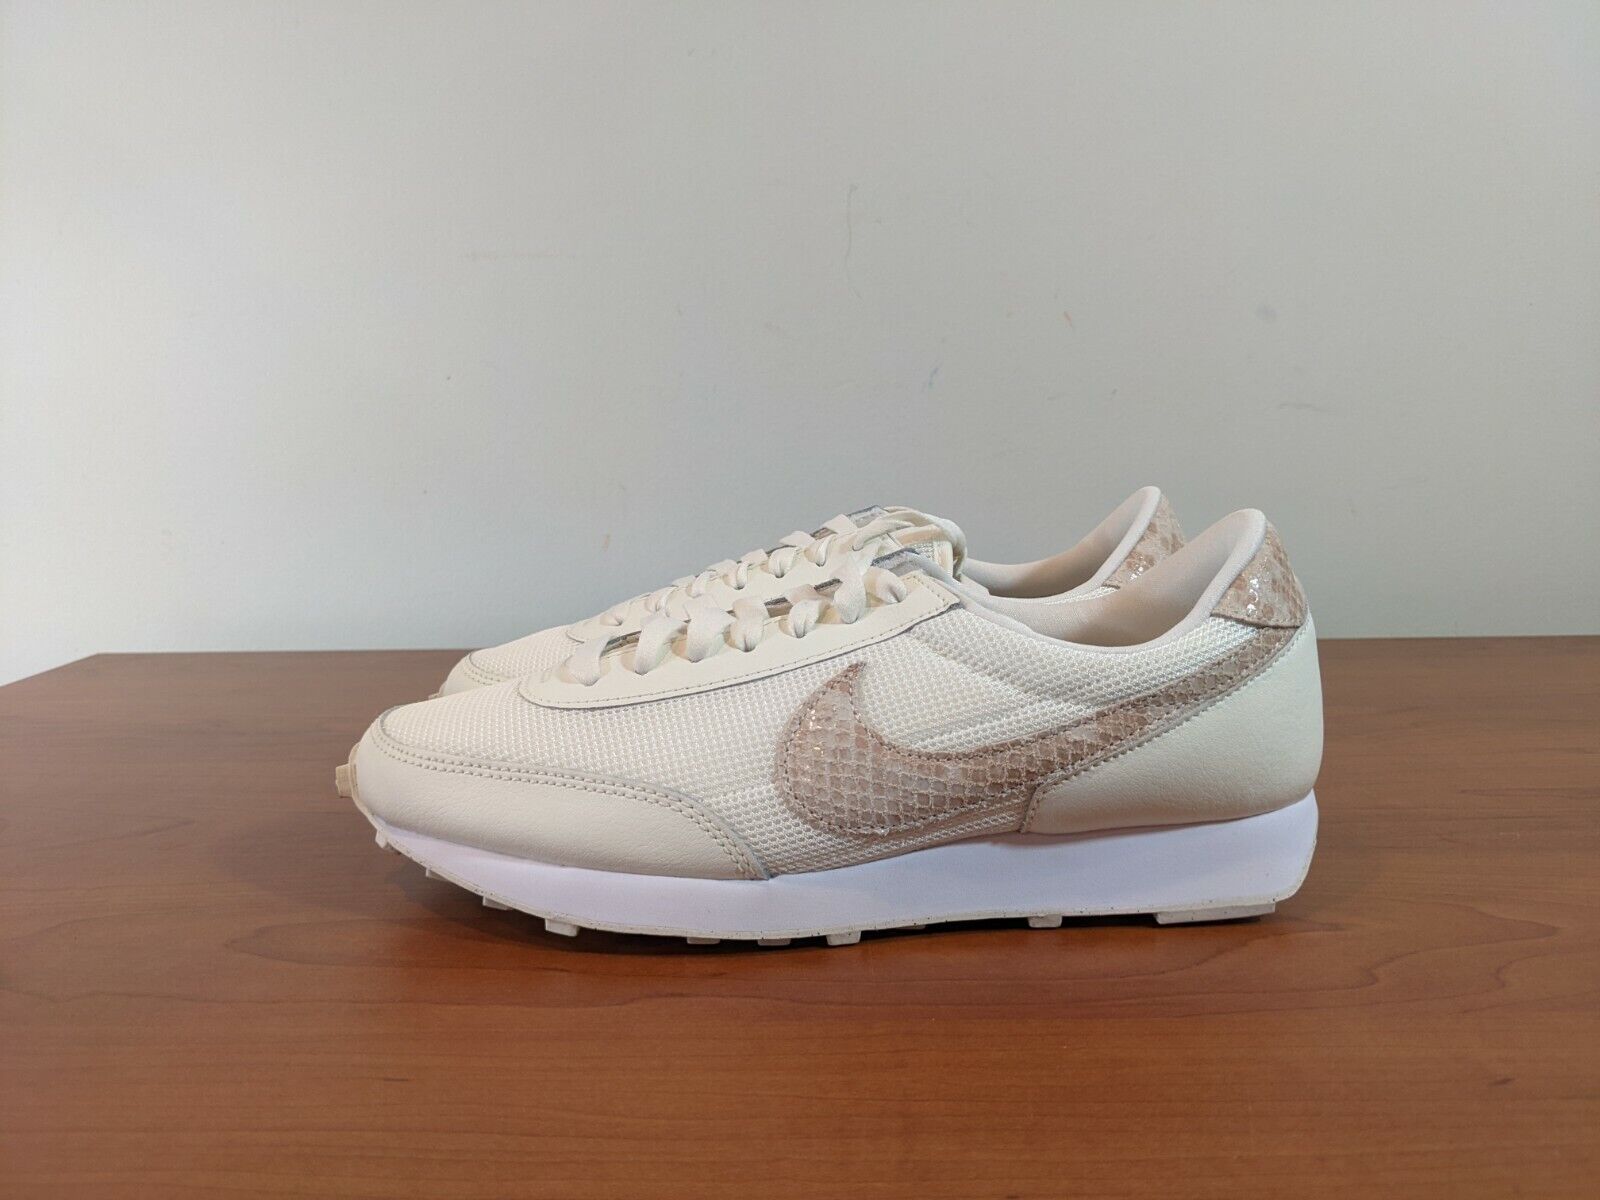 Nike Daybreak Sail Particle Beige White Women\'s Sneakers DH4262 100 Multi Size